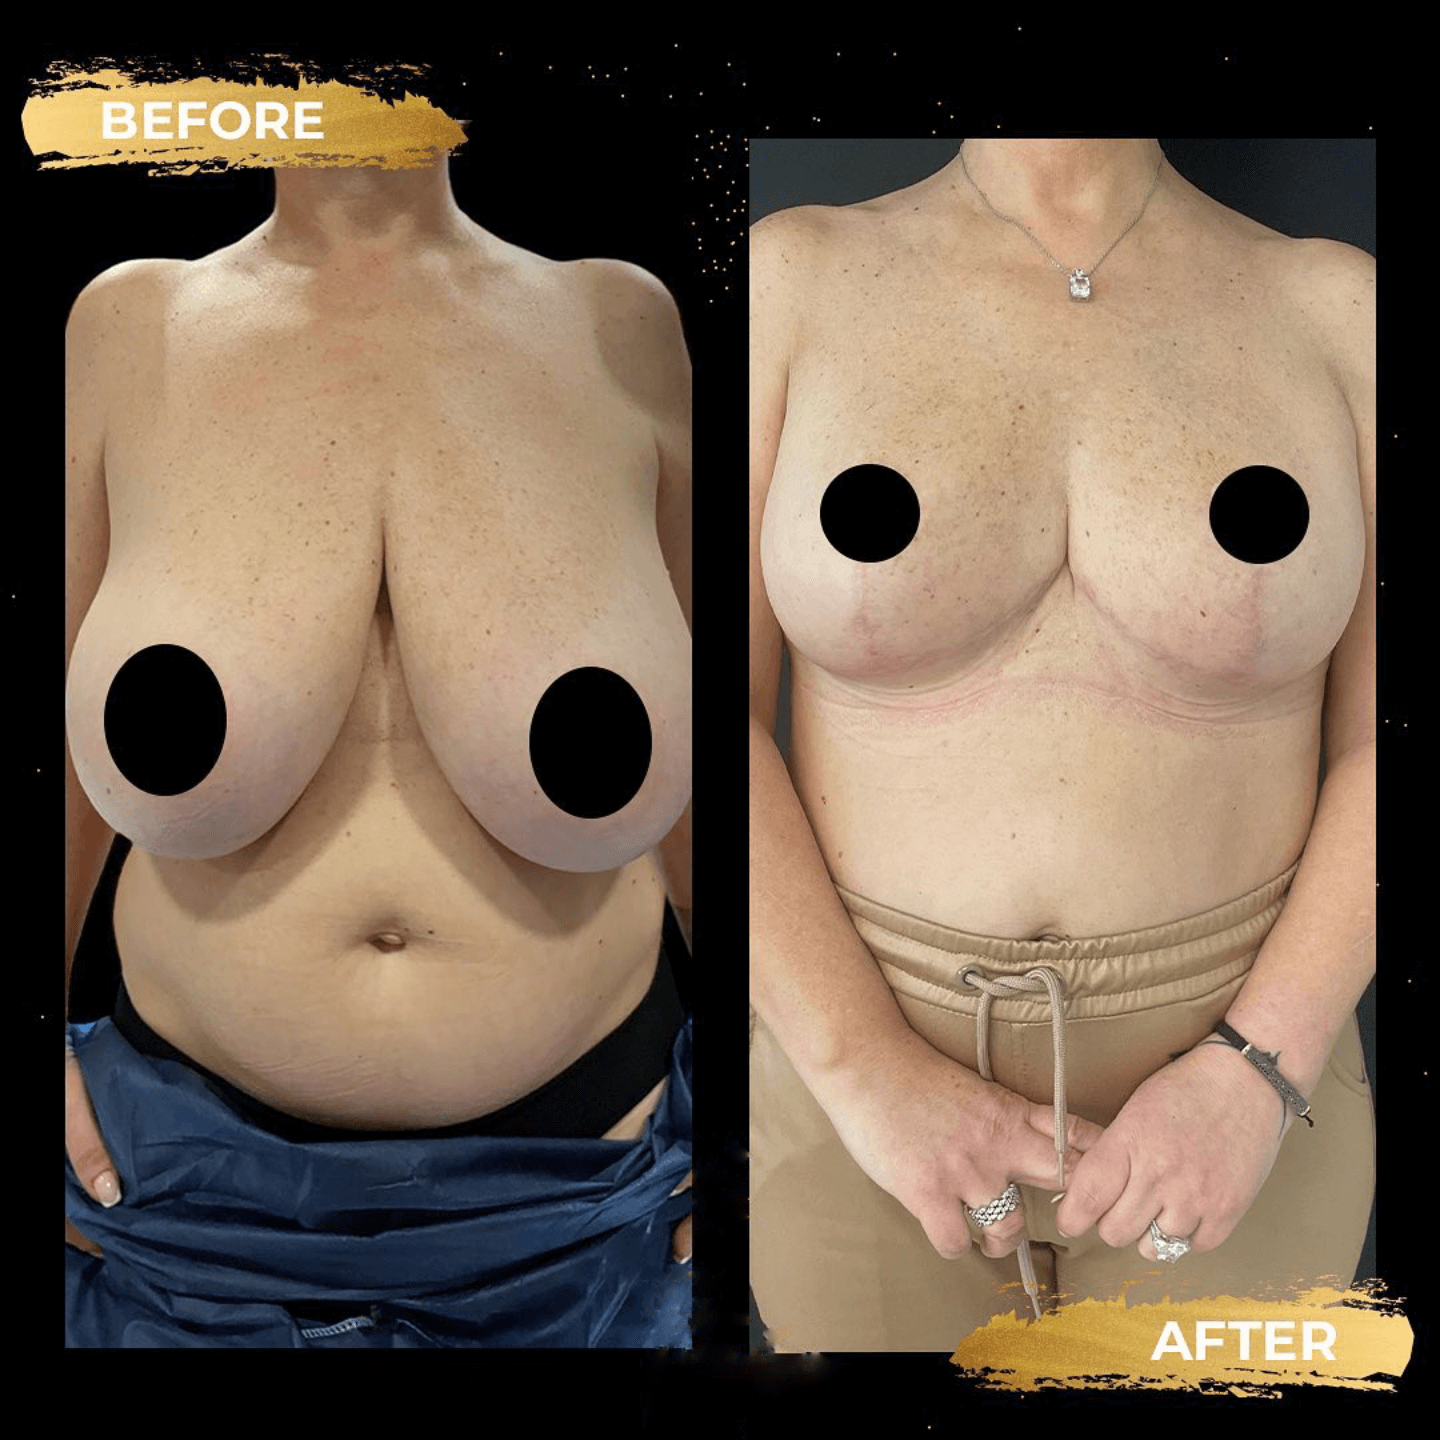 before and after breast reduction in Turkey